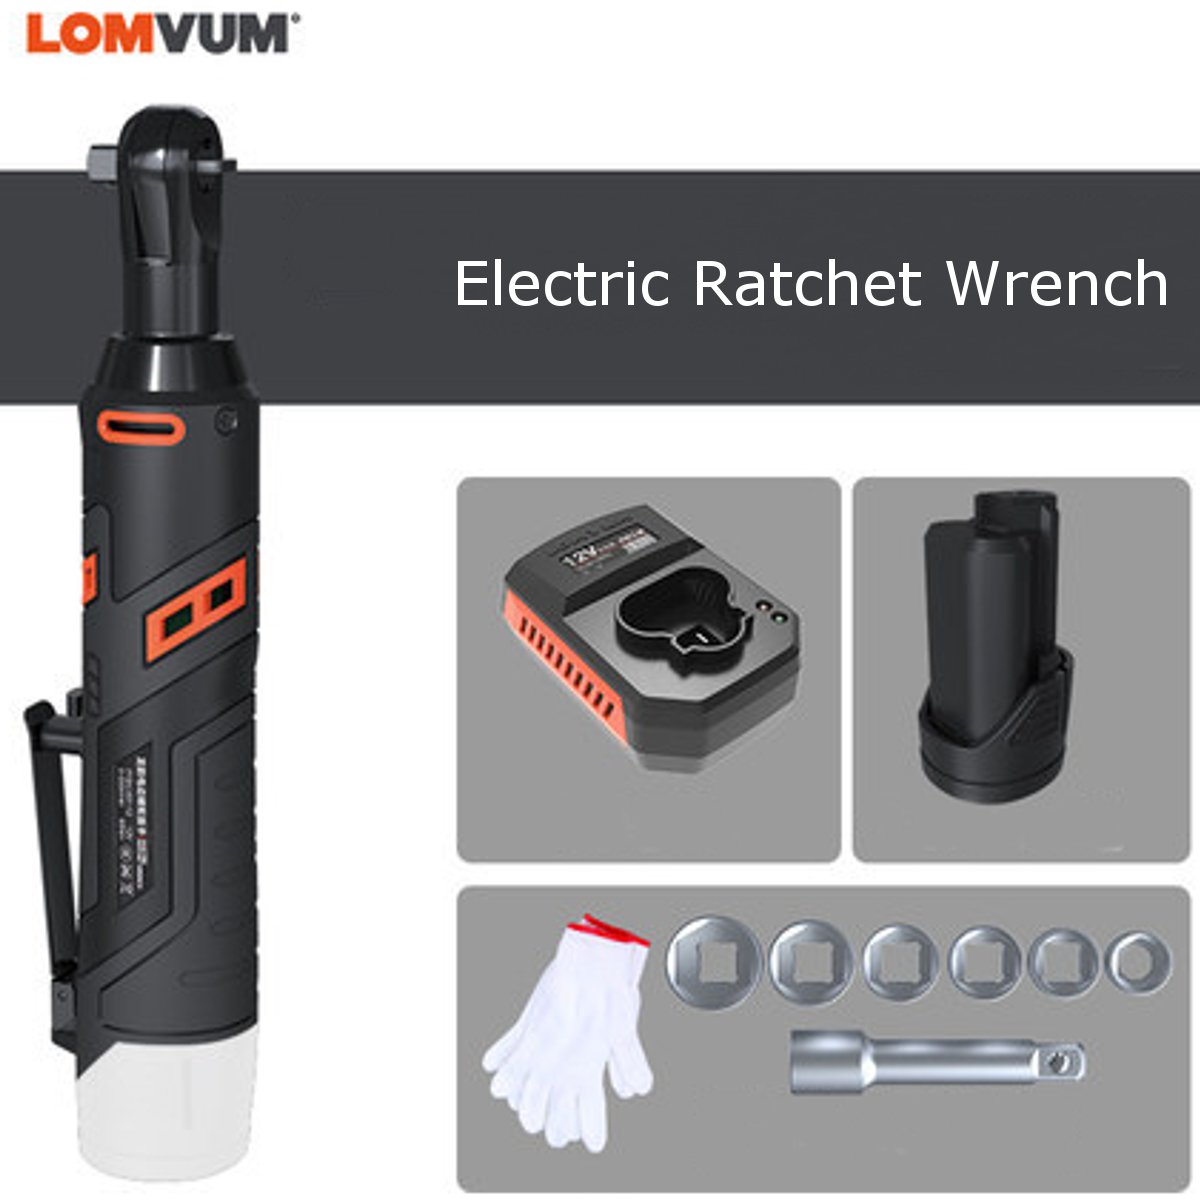 60NM-Cordless-Electric-Ratchet-Wrench-Set-with-12V-Lithium-Ion-Battery-and-Charger-90-Degree-Right-A-1429509-6